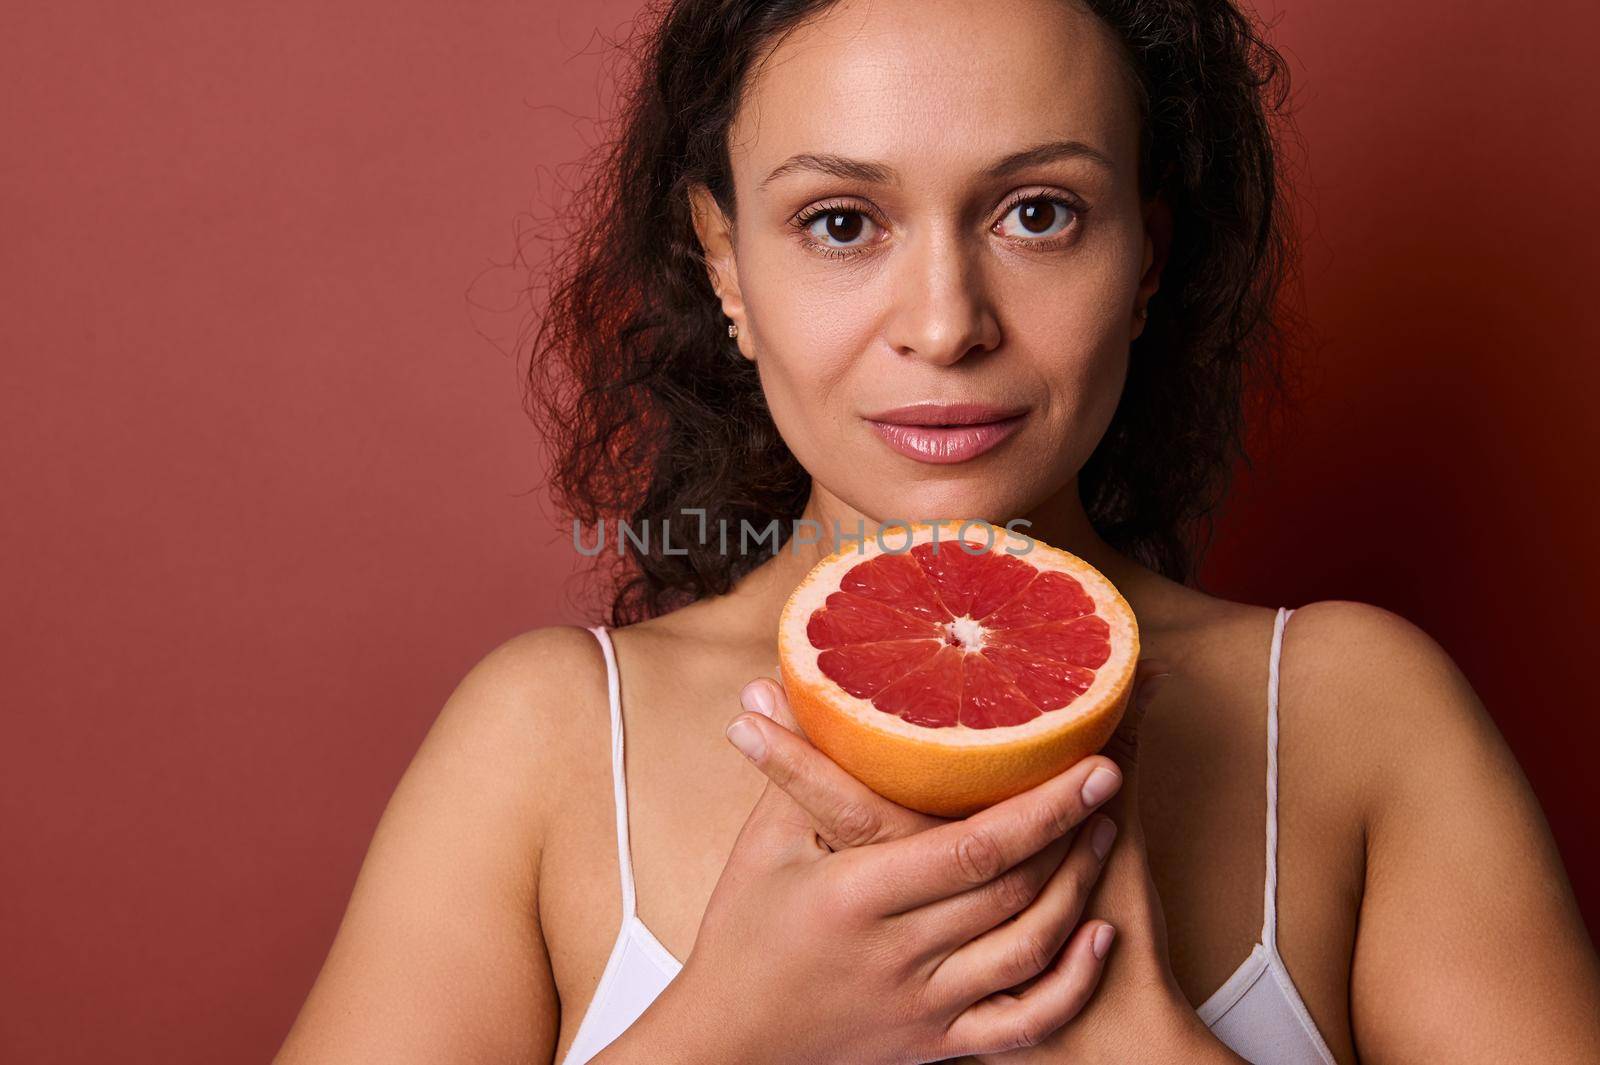 Close-up portrait of attractive woman holding half of fresh juicy red grapefruit, looking at camera, isolated over coral background. Healthcare and medicine, diet and healthy eating, lifestyle concept